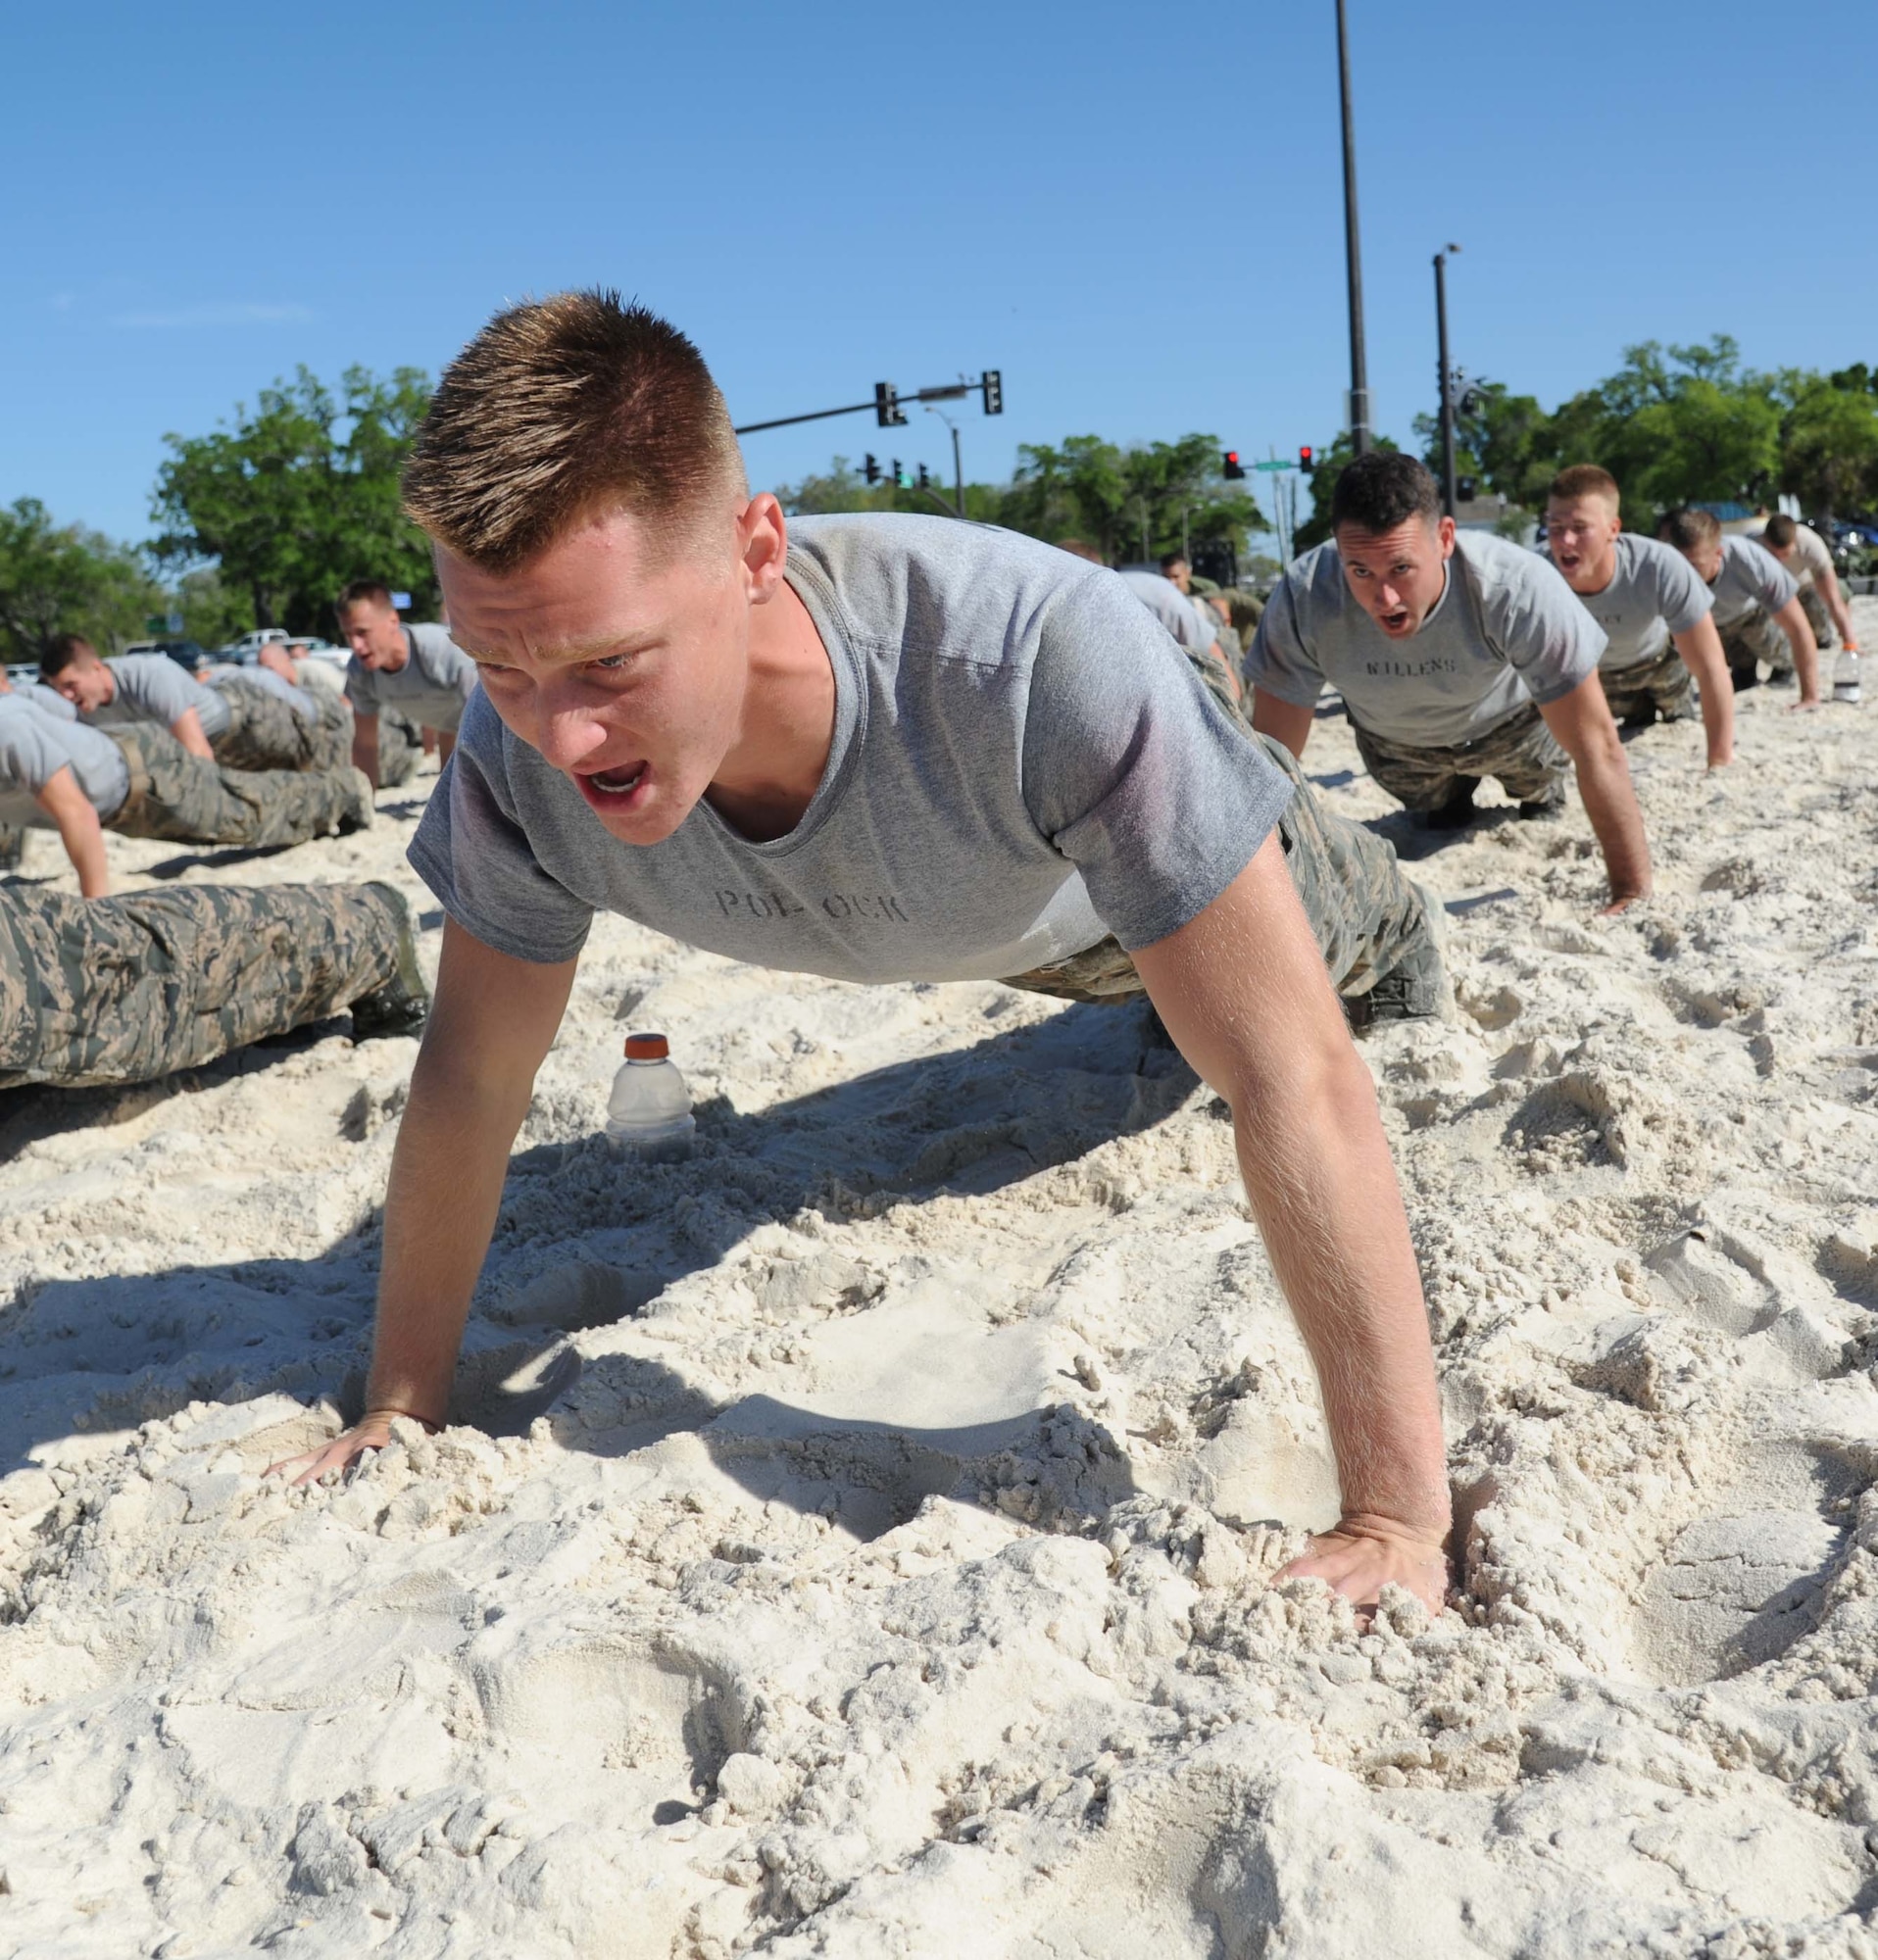 Airman 1st Class Taylor Pollock, 334th Training Squadron, does push-ups during the combat controllers’ physical training session April 12, 2013, on Biloxi beach.  Combat controllers are ground troops who are embedded with special forces teams and provide close-air support for special forces units. While at Keesler, trainees learn how to run, swim, carry a rucksack and conduct air traffic control. These Airmen are prepared physically and mentally for the demands of the combat controller pipeline while earning air traffic control certification in just 15 weeks.  (U.S. Air Force photo by Kemberly Groue)